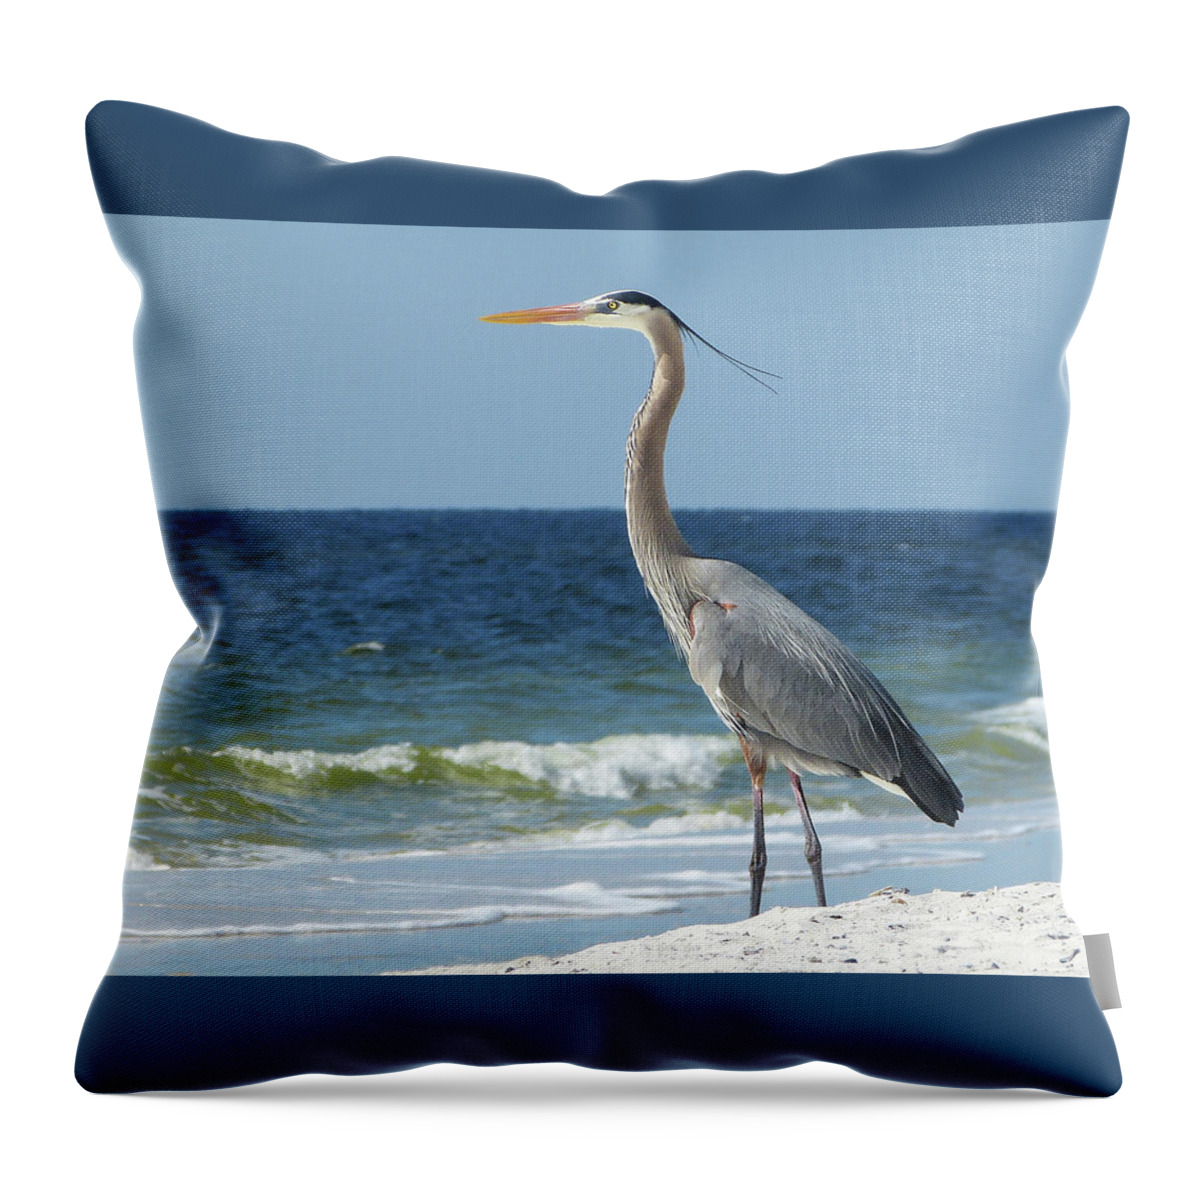  Throw Pillow featuring the photograph Great Blue Heron #1 by Carla Brennan